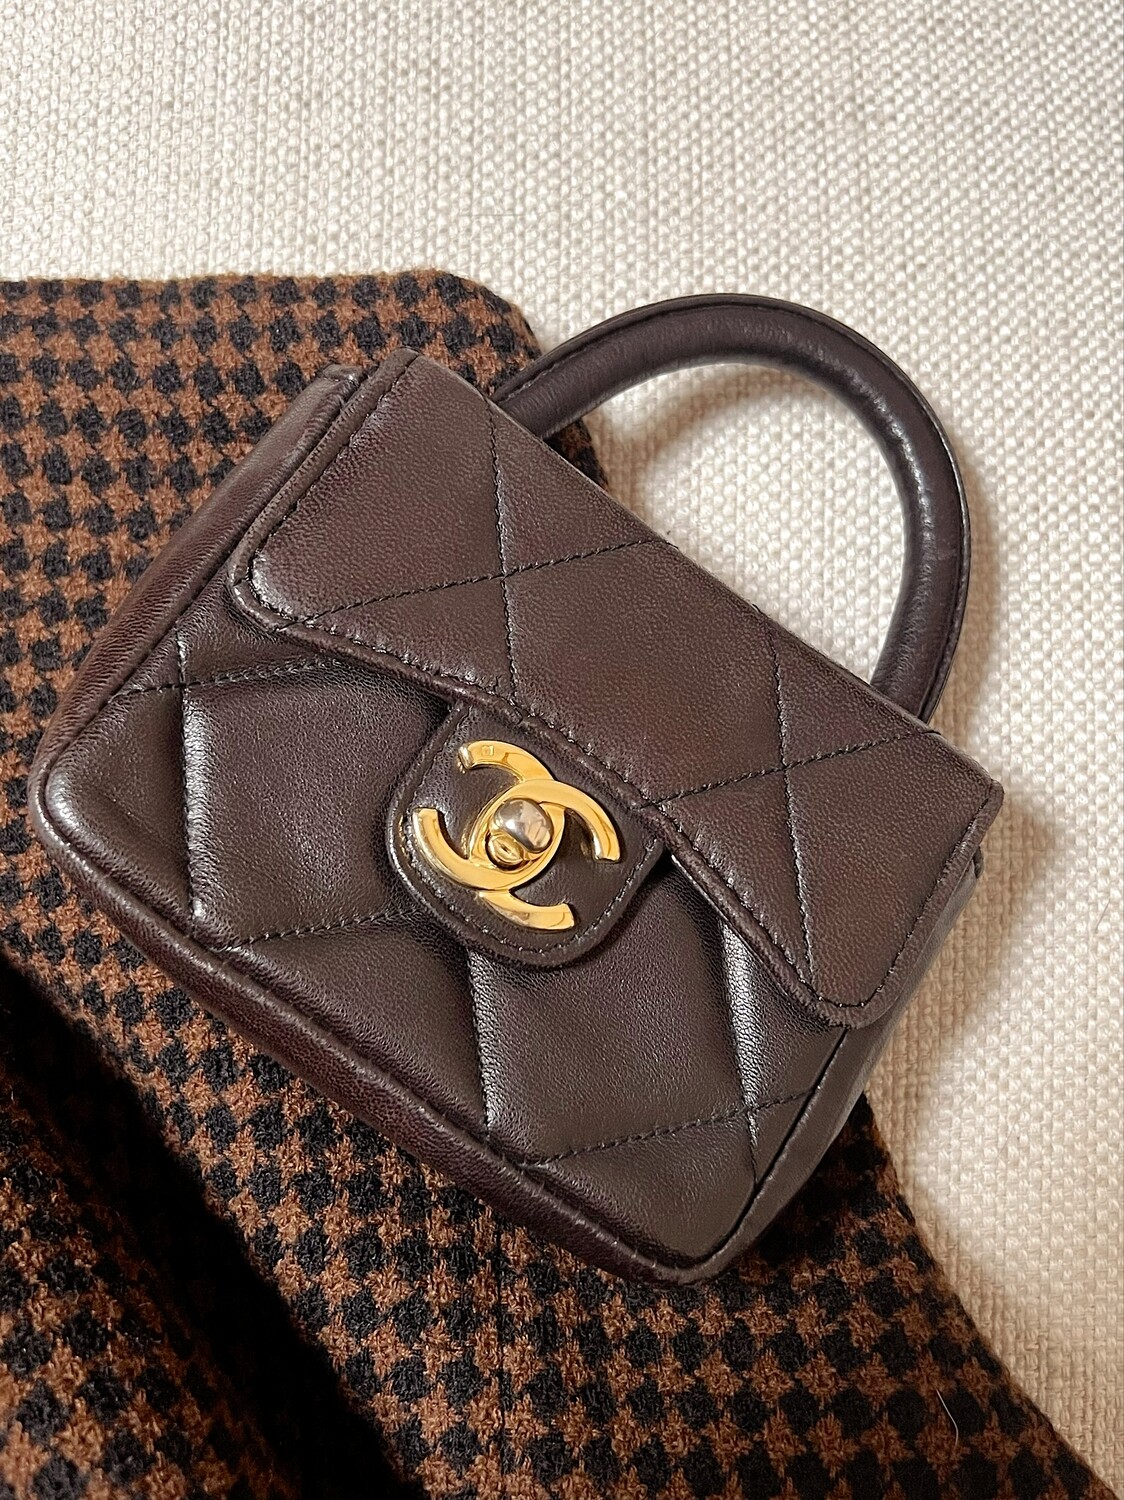 CHANEL CC LOGO TURN LOCK MICRO MINI KELLY TOP HANDLE BROWN QUILTED LEATHER  BAG - VINTAGE